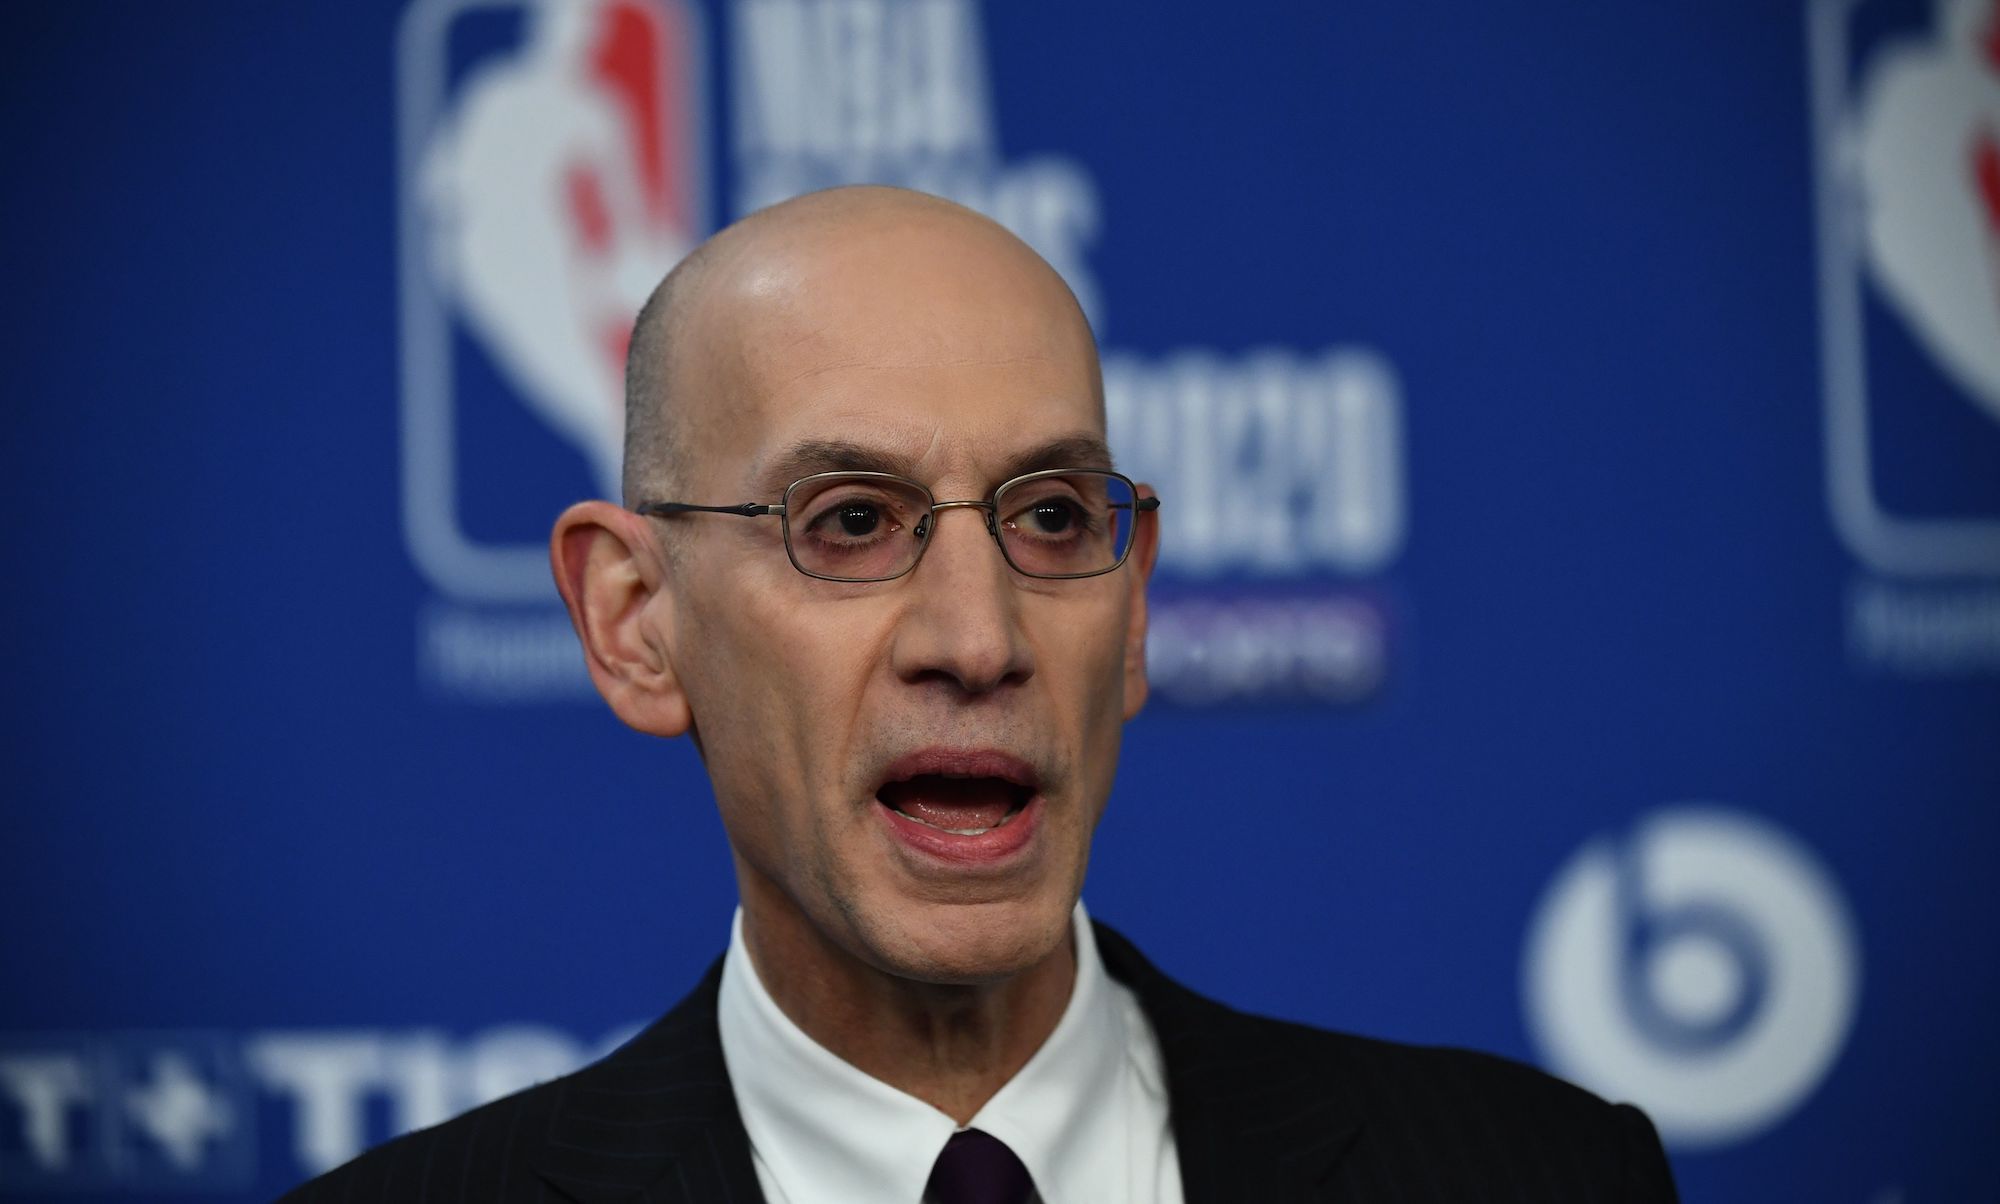 NBA commissioner Adam Silver gestures as he addresses a press conference ahead of the NBA basketball match between Milwaukee Bucks and Charlotte Hornets at The AccorHotels Arena in Paris on January 24, 2020. (Photo by FRANCK FIFE / AFP) (Photo by FRANCK FIFE/AFP via Getty Images)